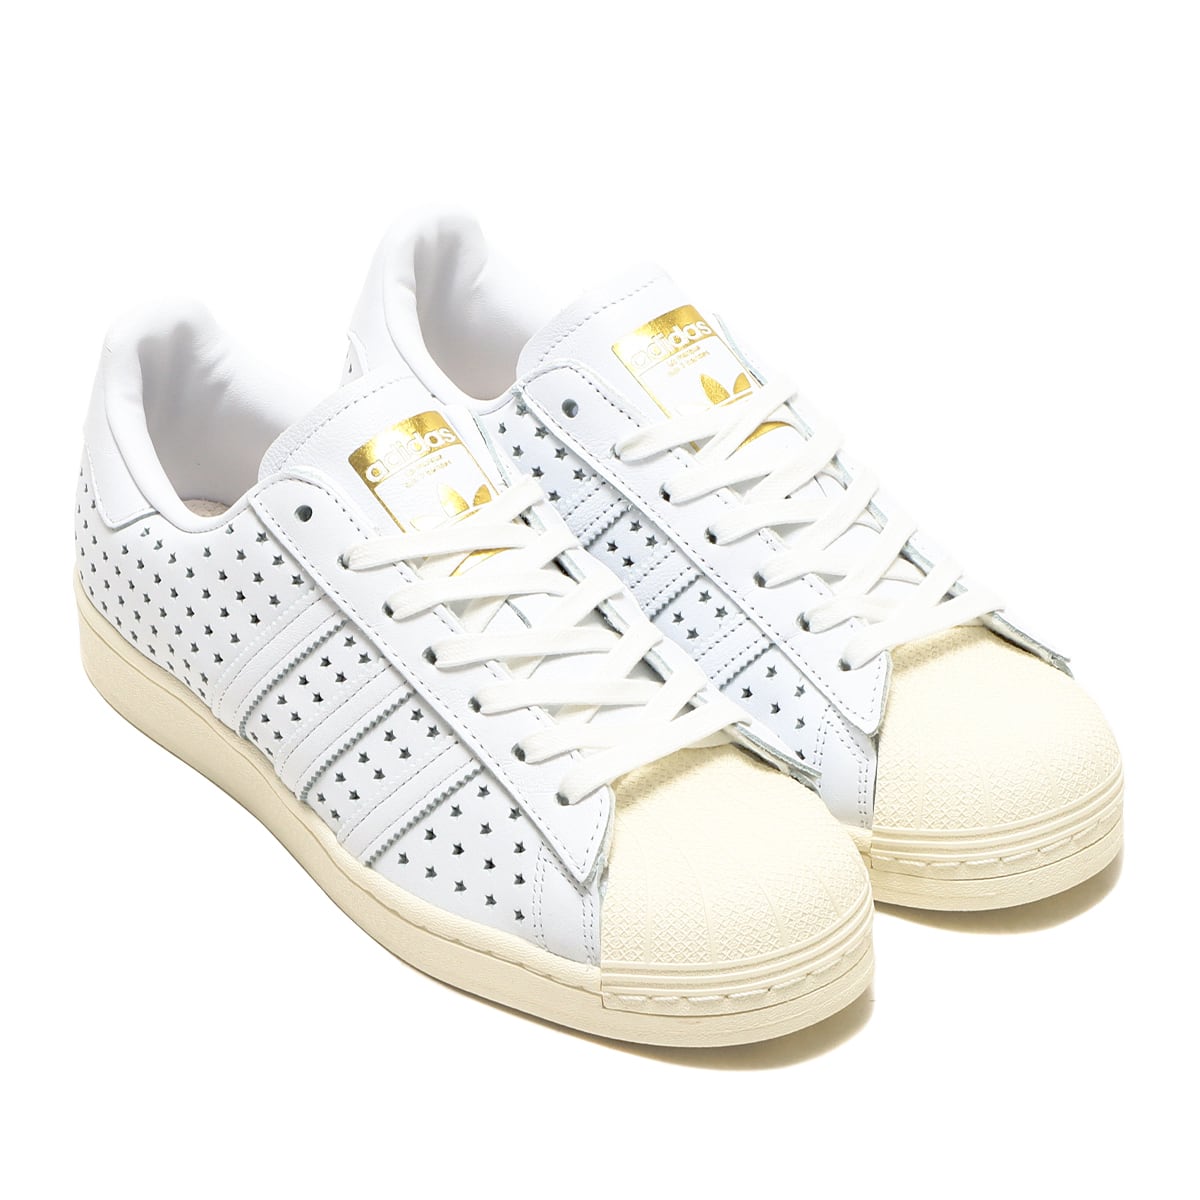 adidas SUPERSTAR atmos "GOLD STAR" FOOTWEAR WHITE/FOOTWEAR WHITE/OFF WHITE 22FW-S_photo_large